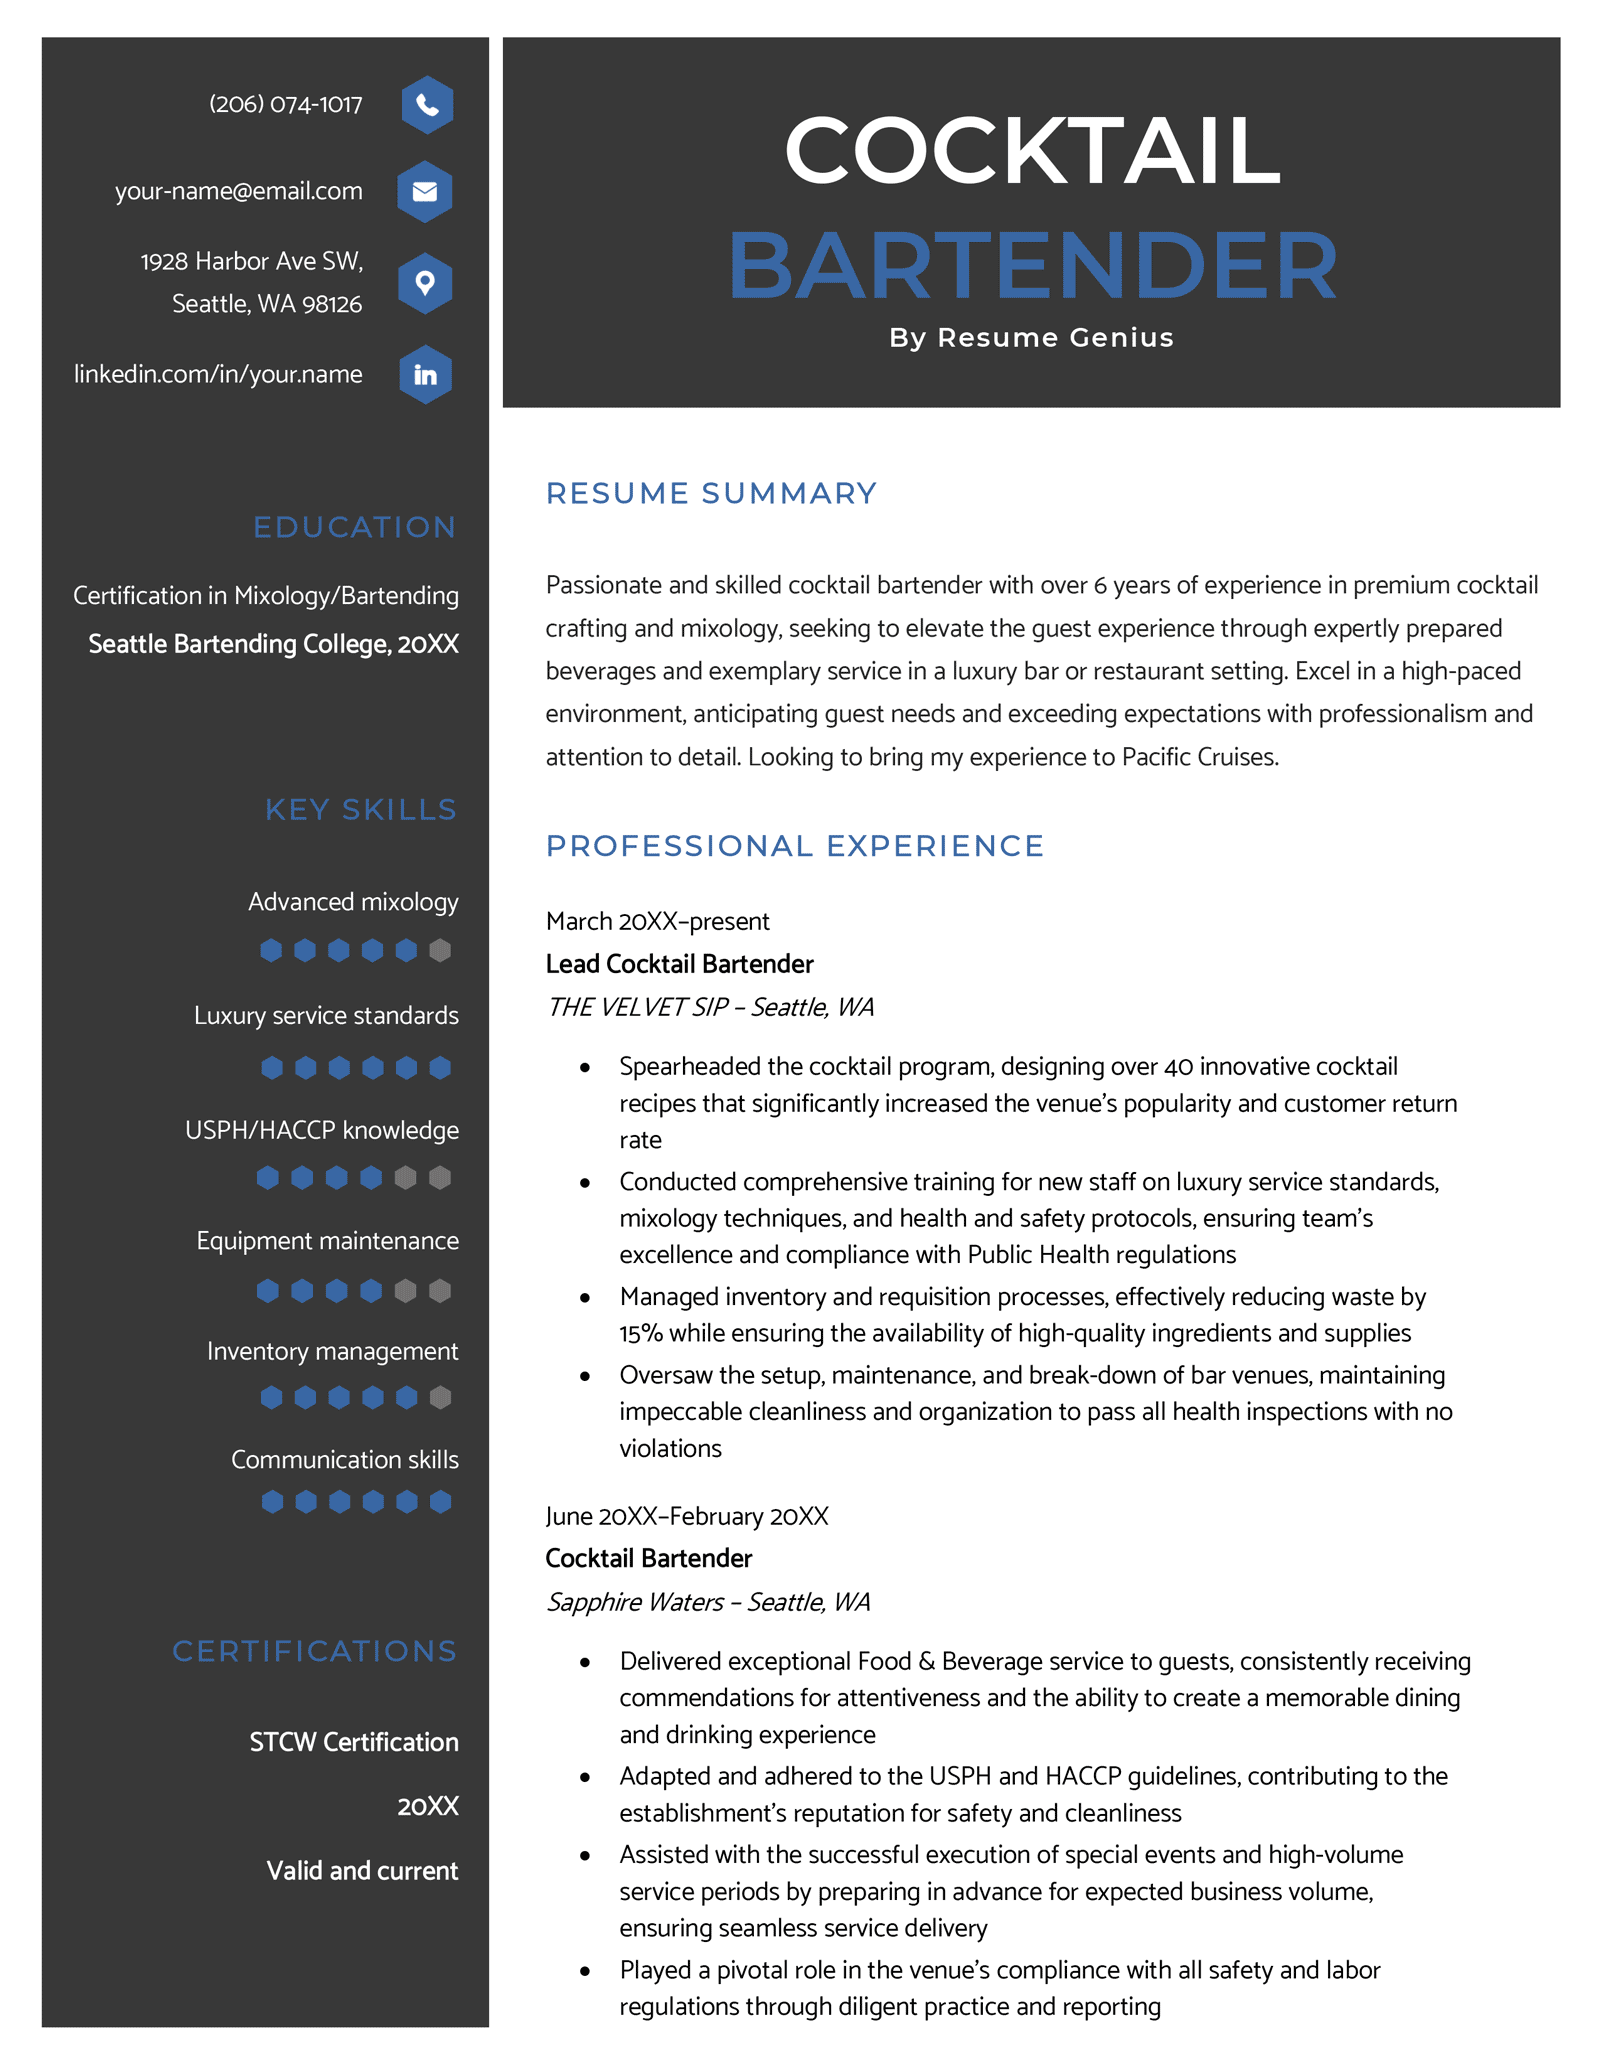 A cocktail bartender resume example that uses a black-and-blue color scheme along with a sidebar design to highlight key sections.